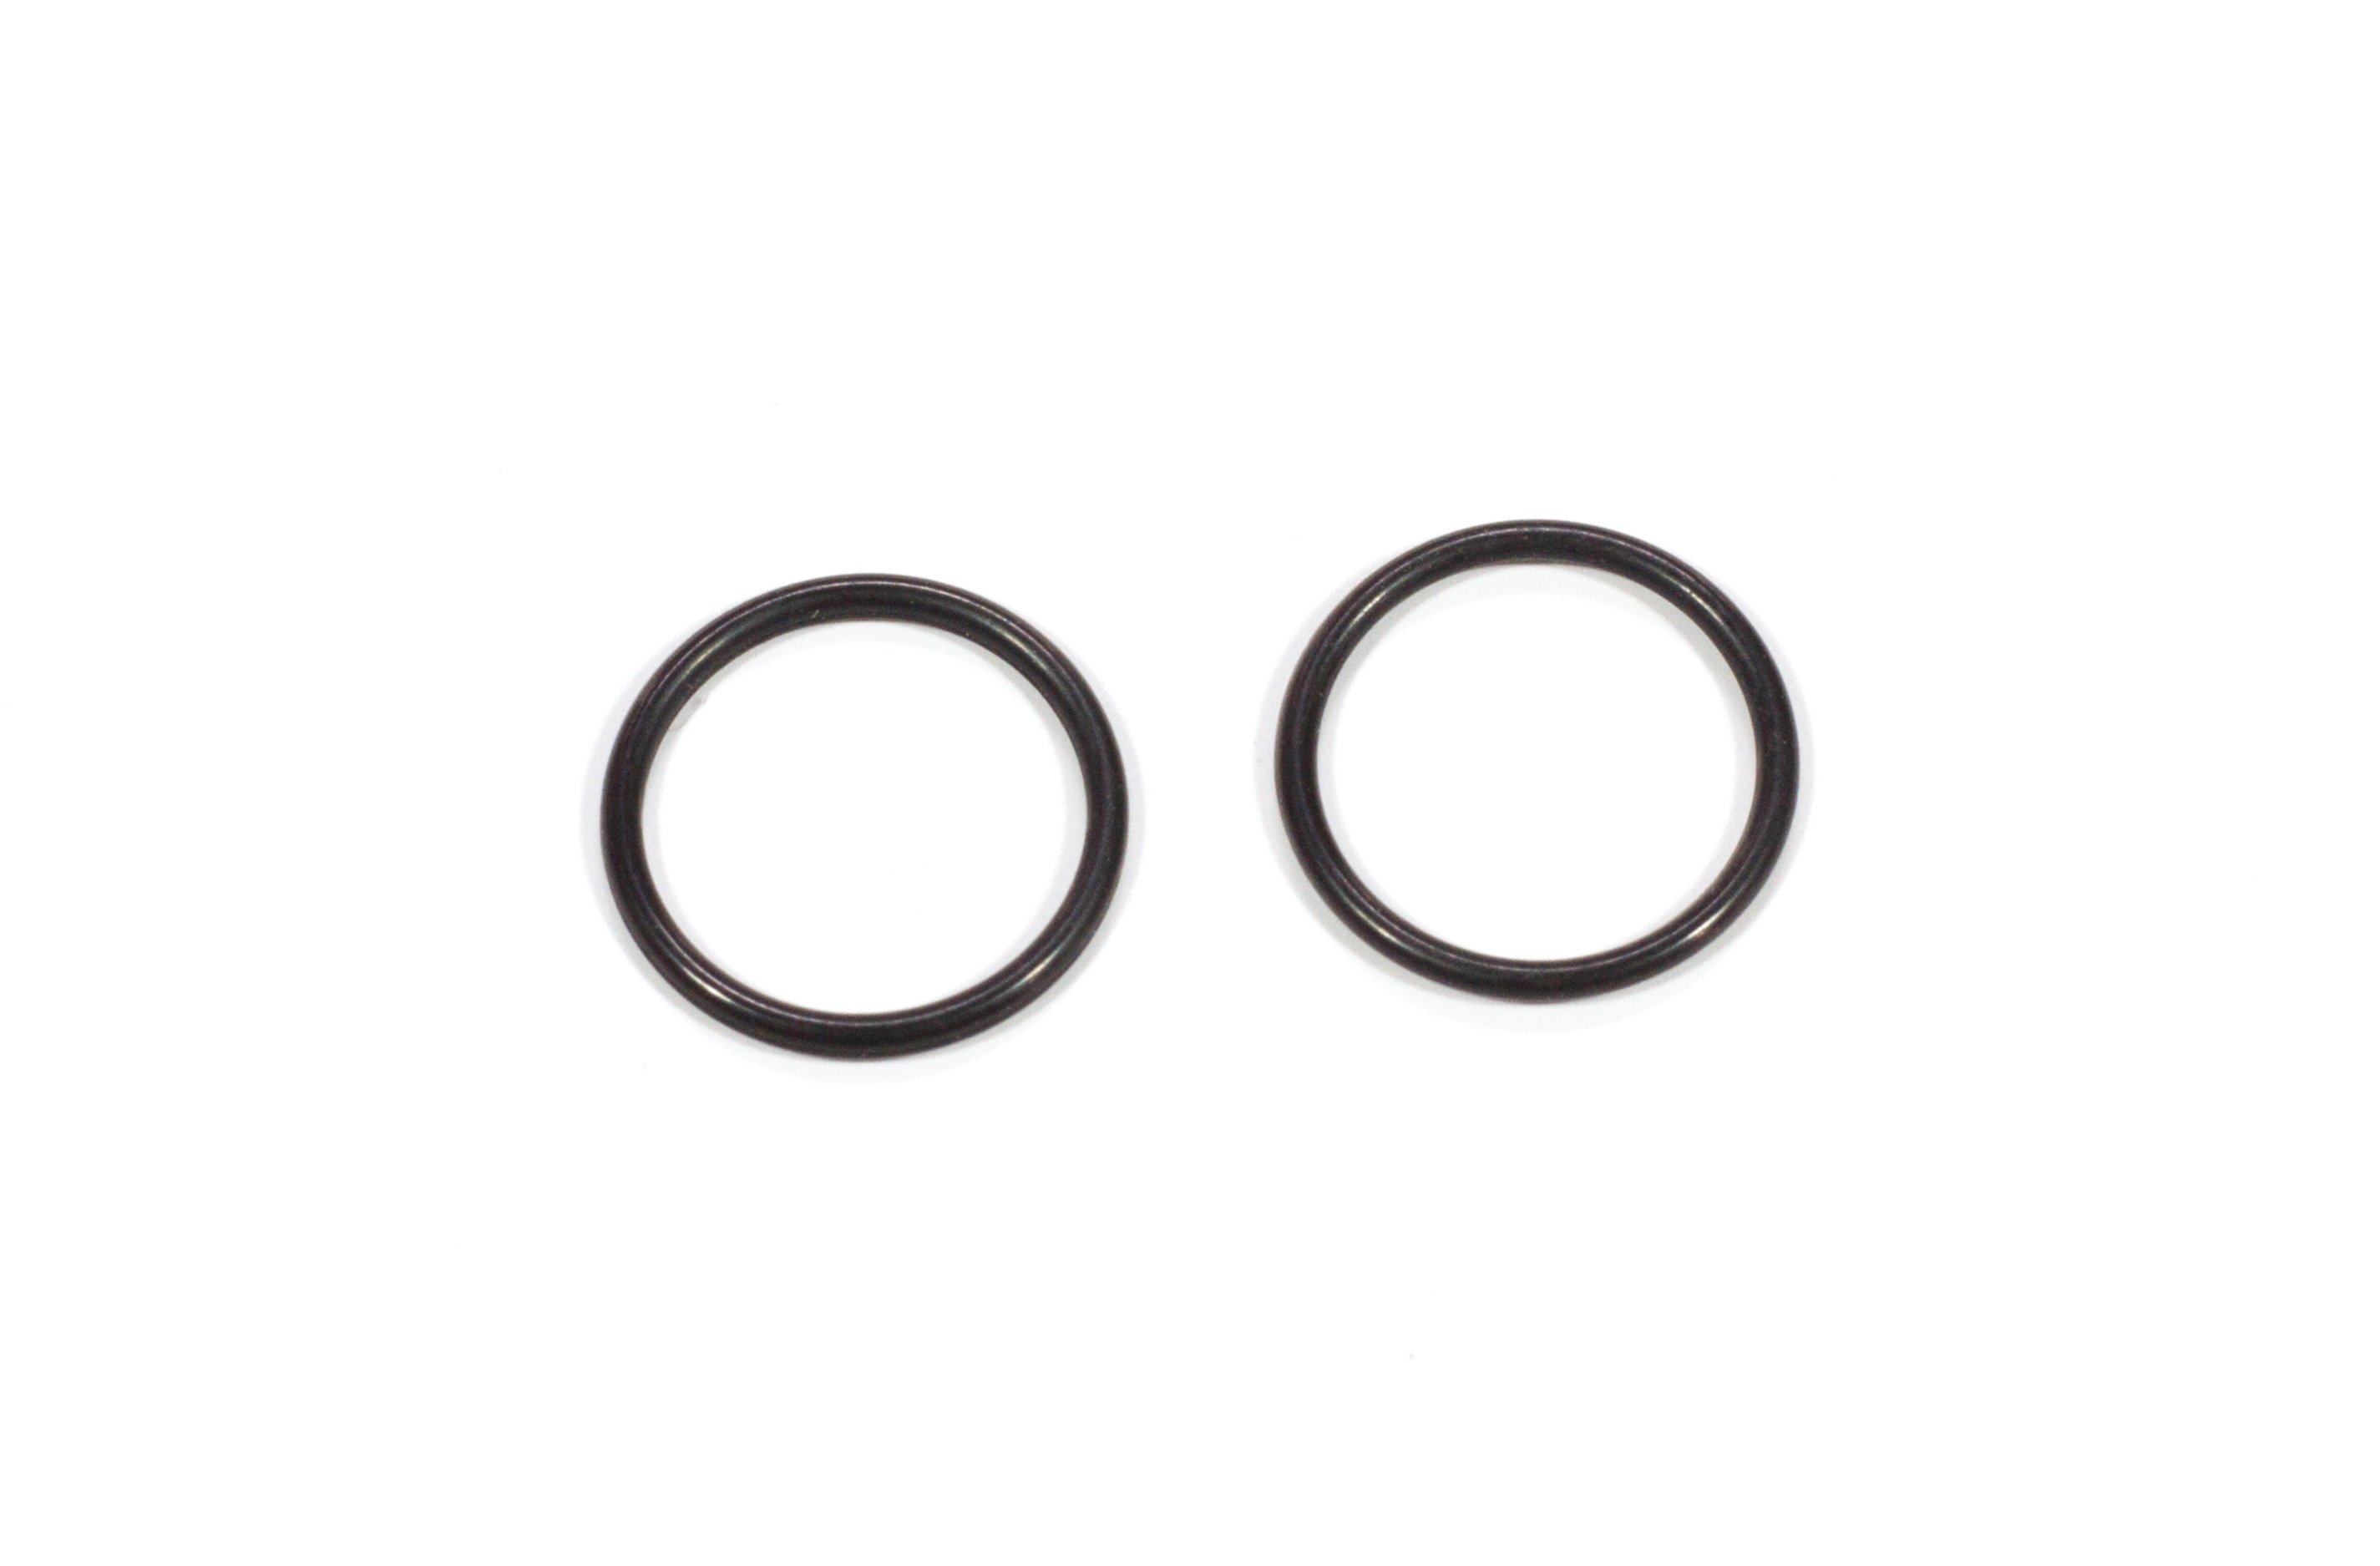 y0987/02 Replacement o-ring for Volume compensation no. y0987